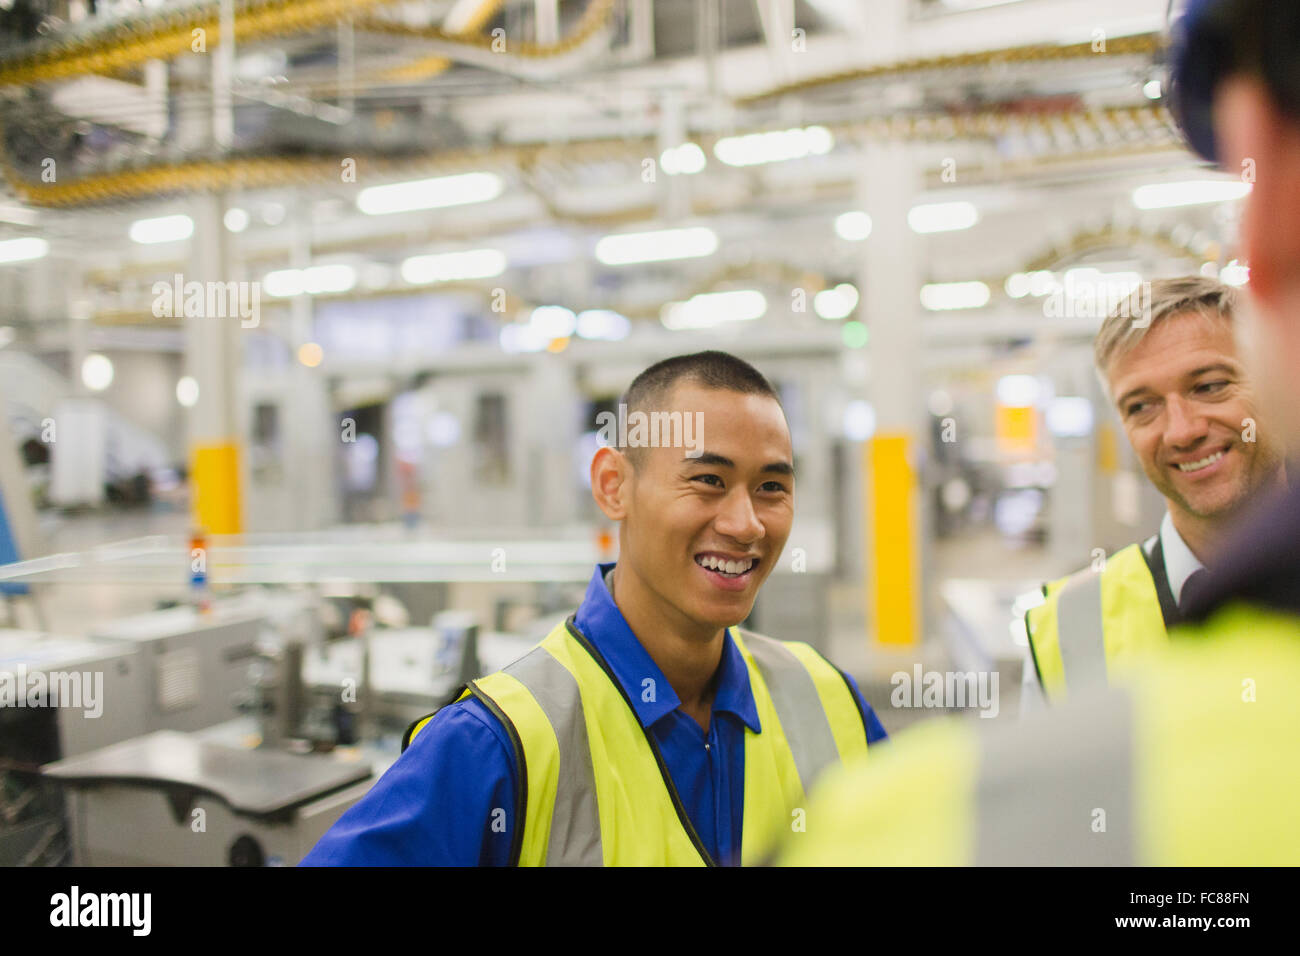 Workers in reflective clothing talking in factory Stock Photo